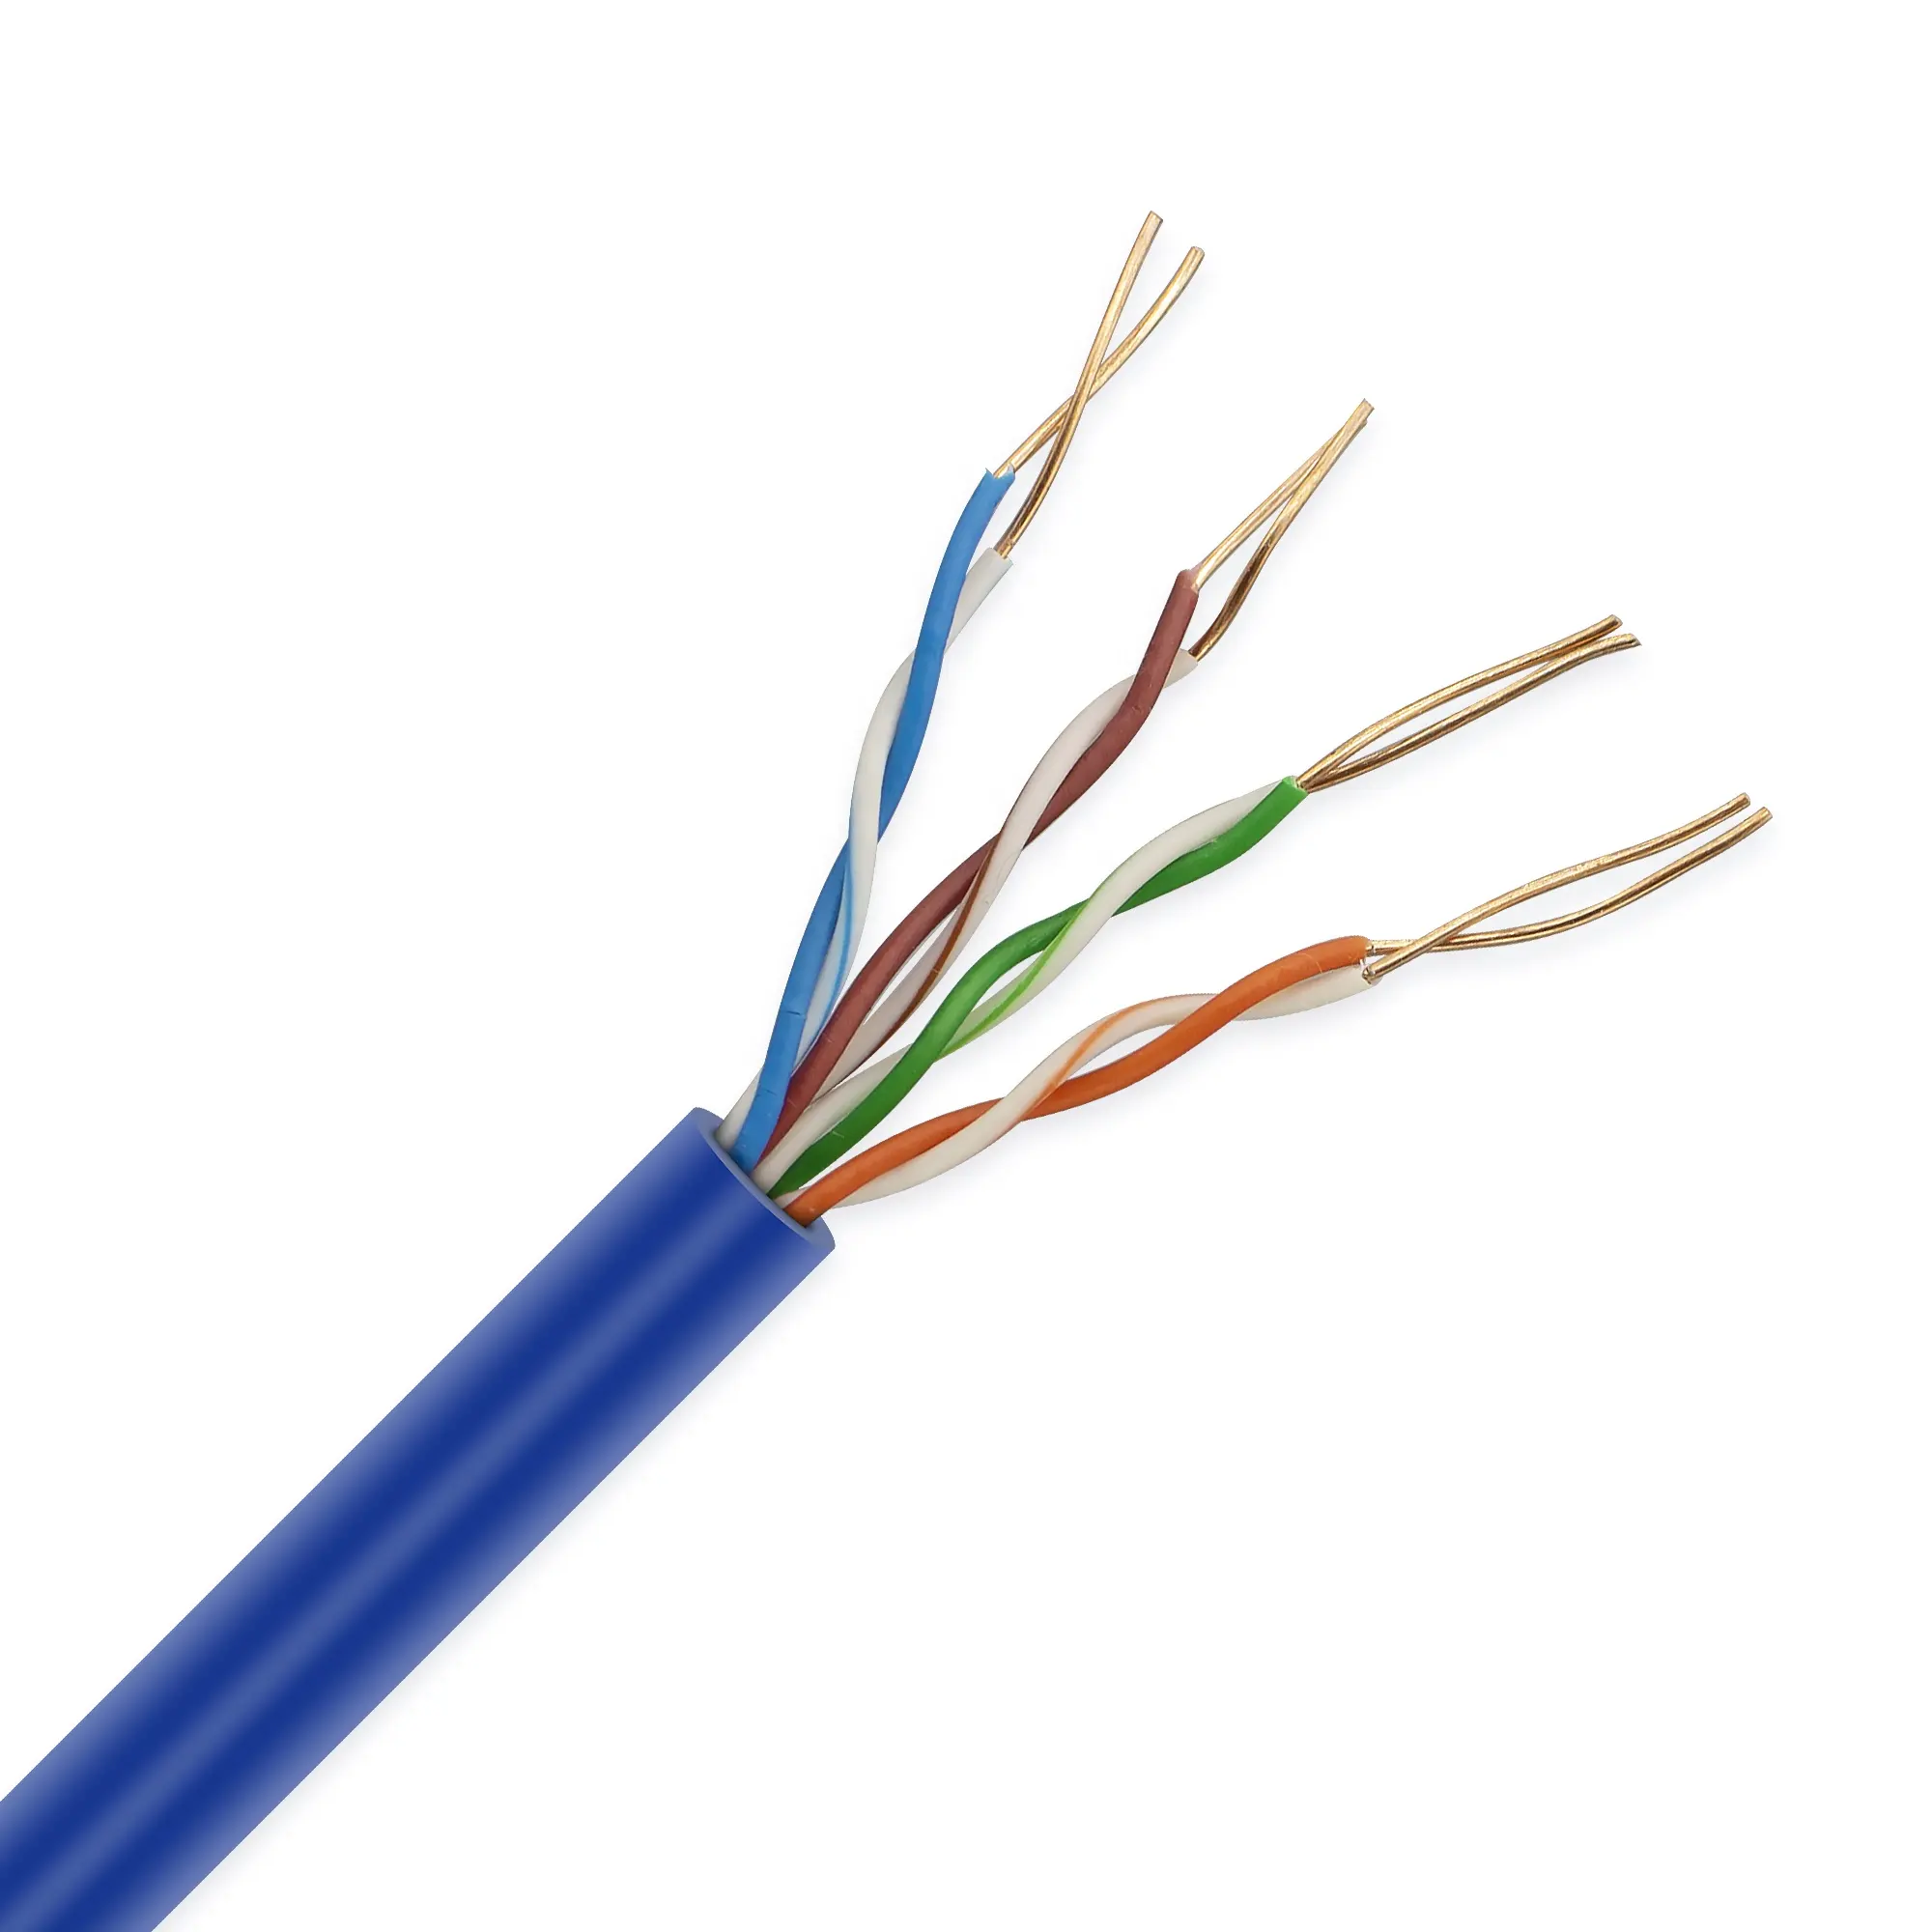 OEM Cat6a Cat7 ethernet cable 305M 1000FT communication cables copper wire network Cat 7 6a UTP lan cable